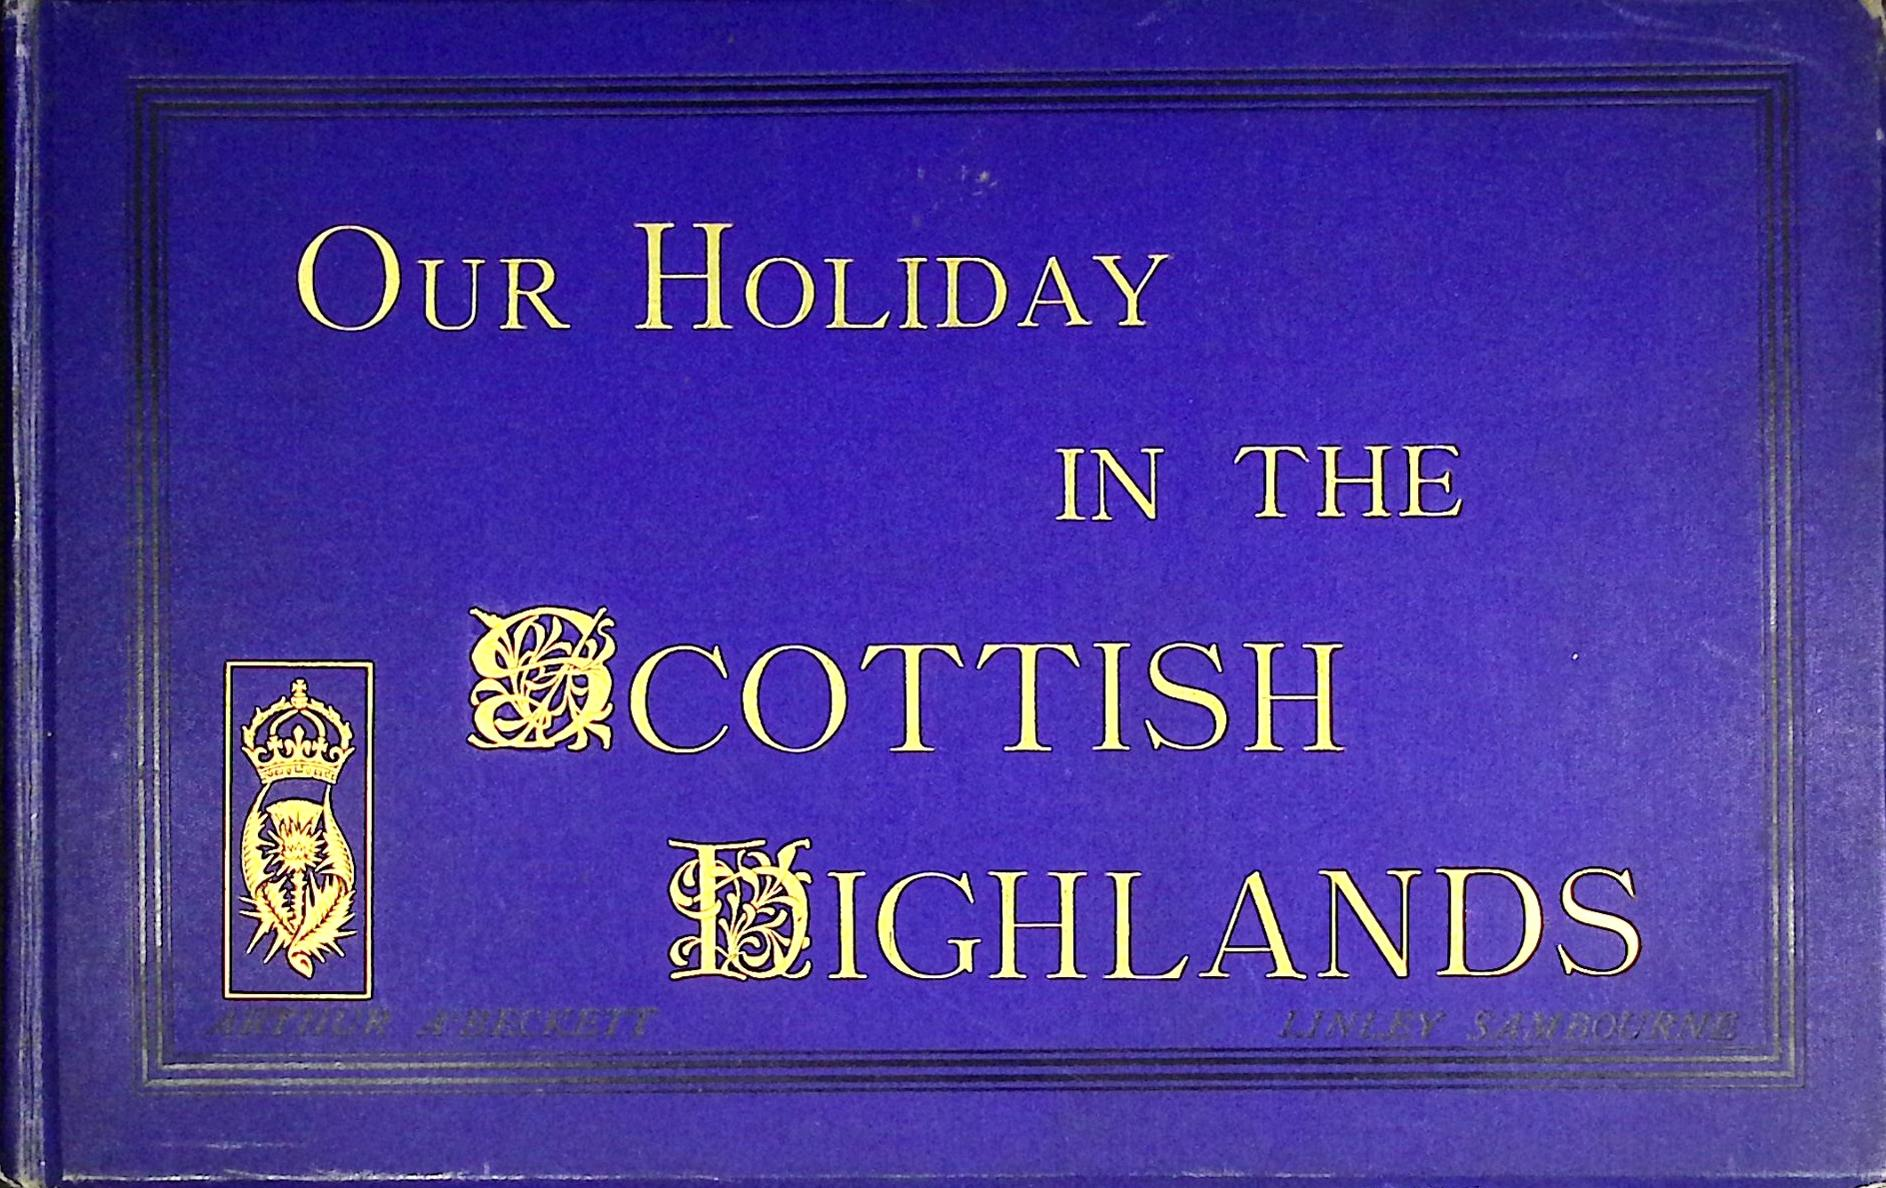 Our Holiday in the Scottish Highlands